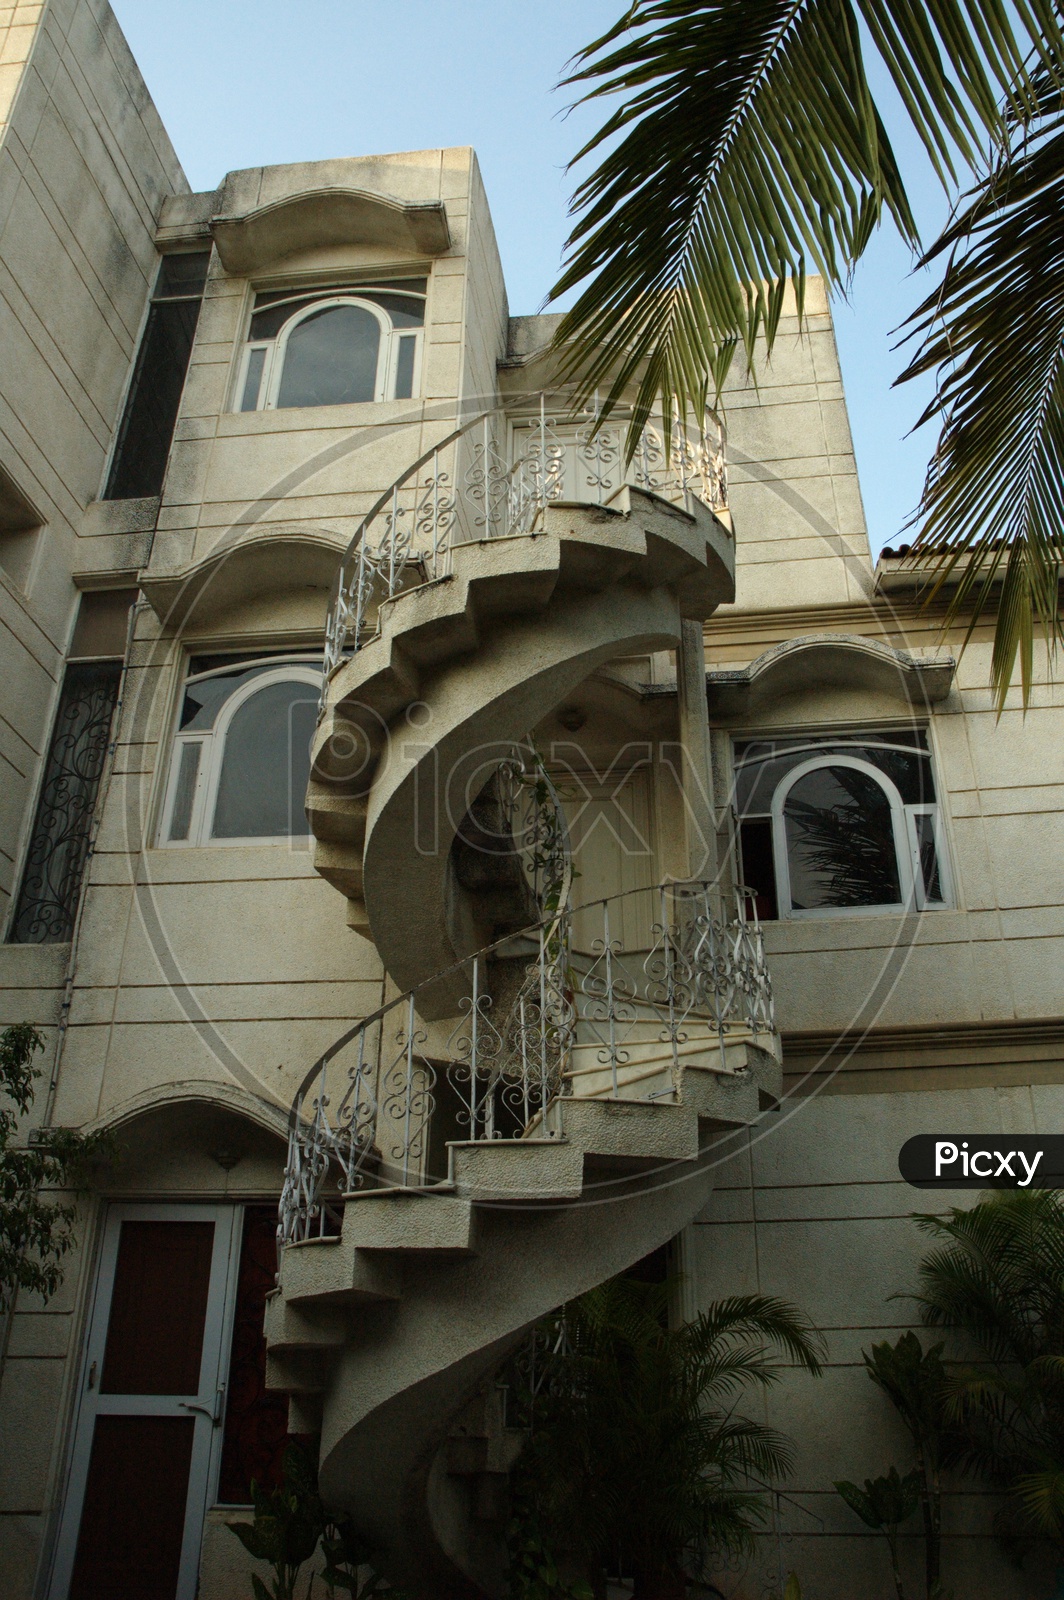 Spiral Staircase outside a building